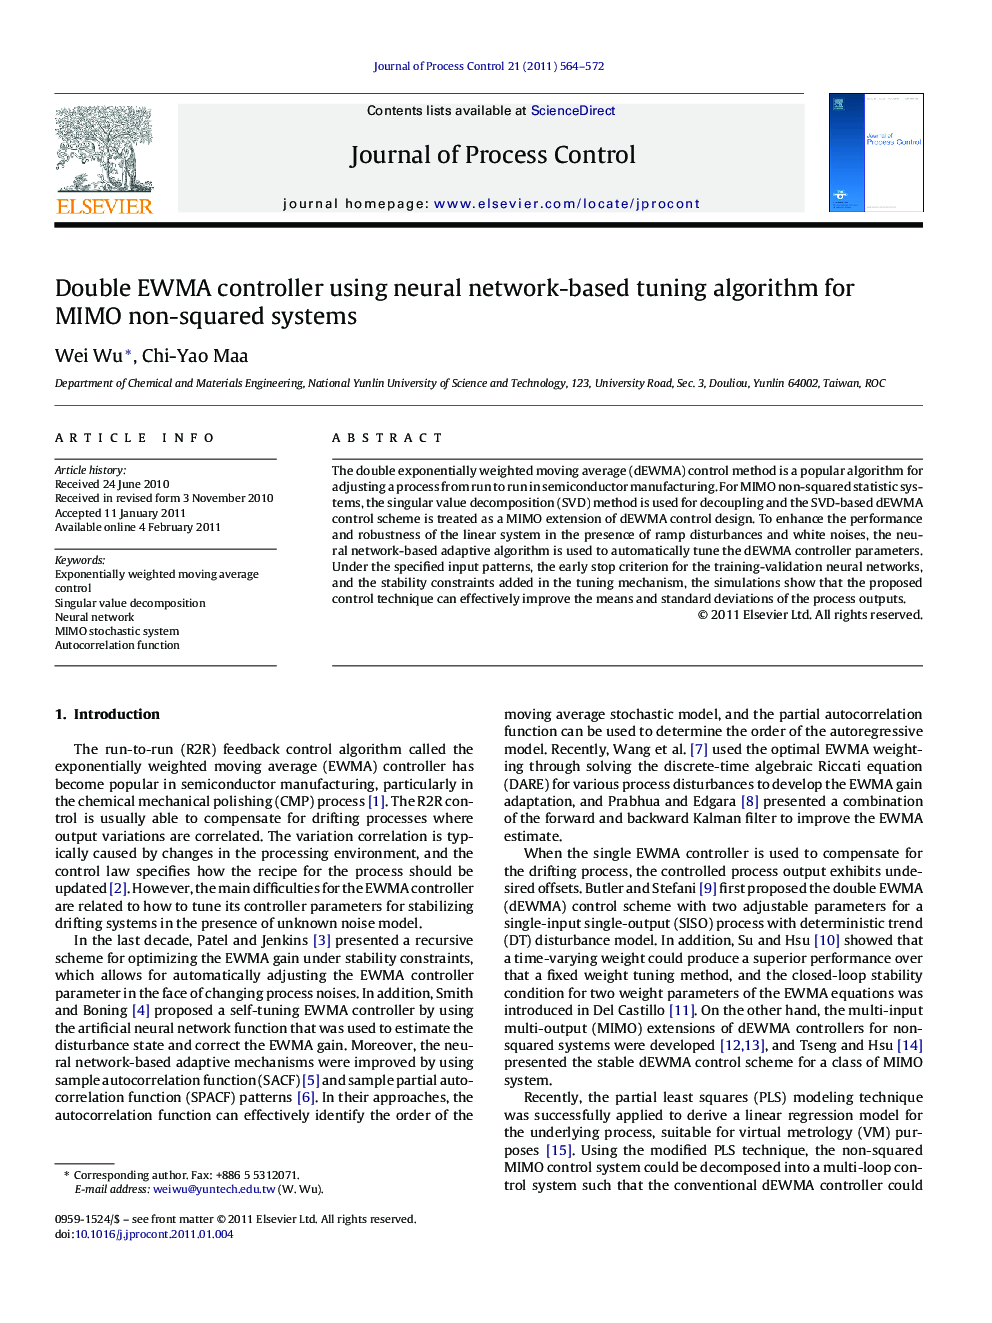 Double EWMA controller using neural network-based tuning algorithm for MIMO non-squared systems